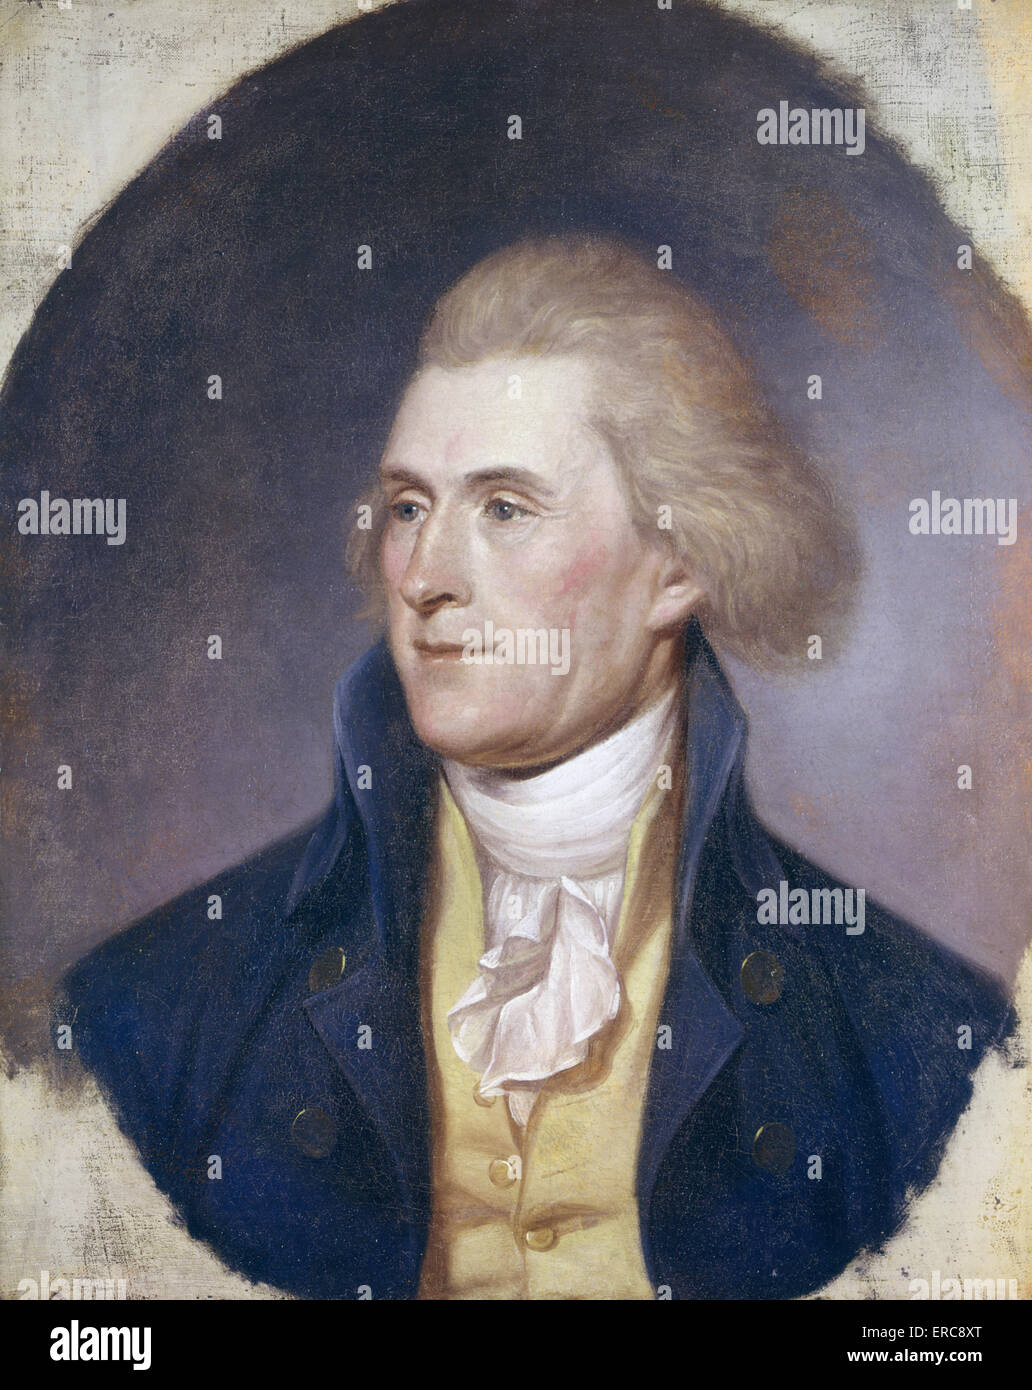 1791 PORTRAIT THOMAS JEFFERSON  BY CHARLES WILLSON PEALE AMERICAN PRESIDENT PRINCIPAL AUTHOR DECLARATION OF INDEPENDENCE Stock Photo